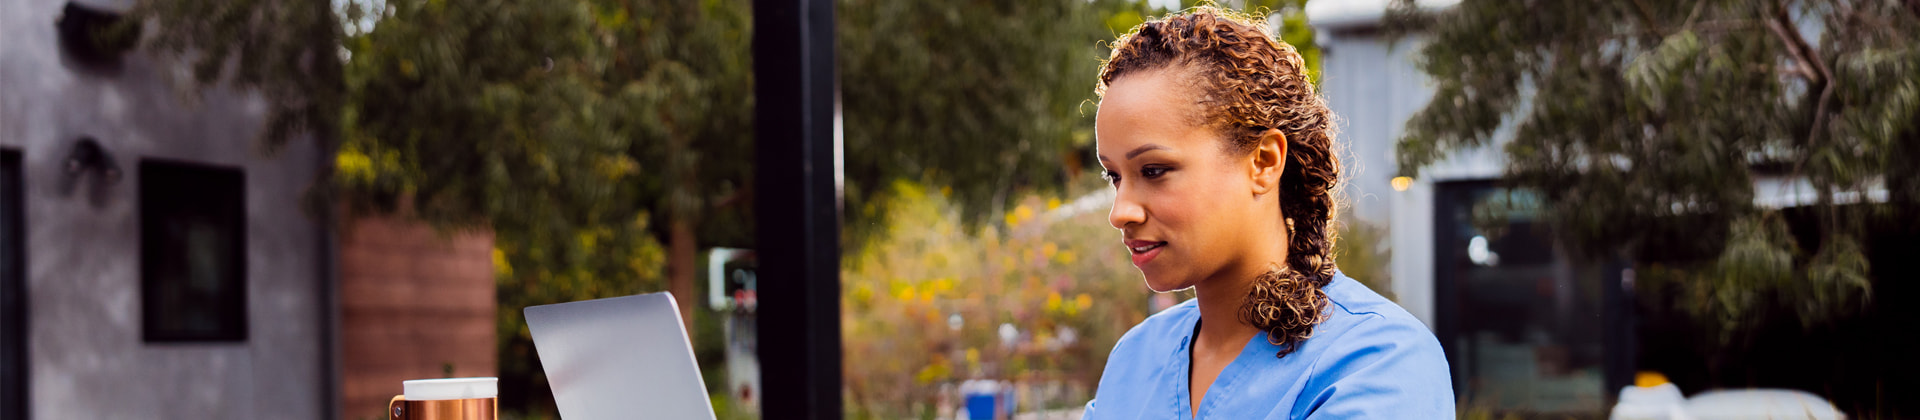 A woman in blue scrubs sits outside looking at a laptop